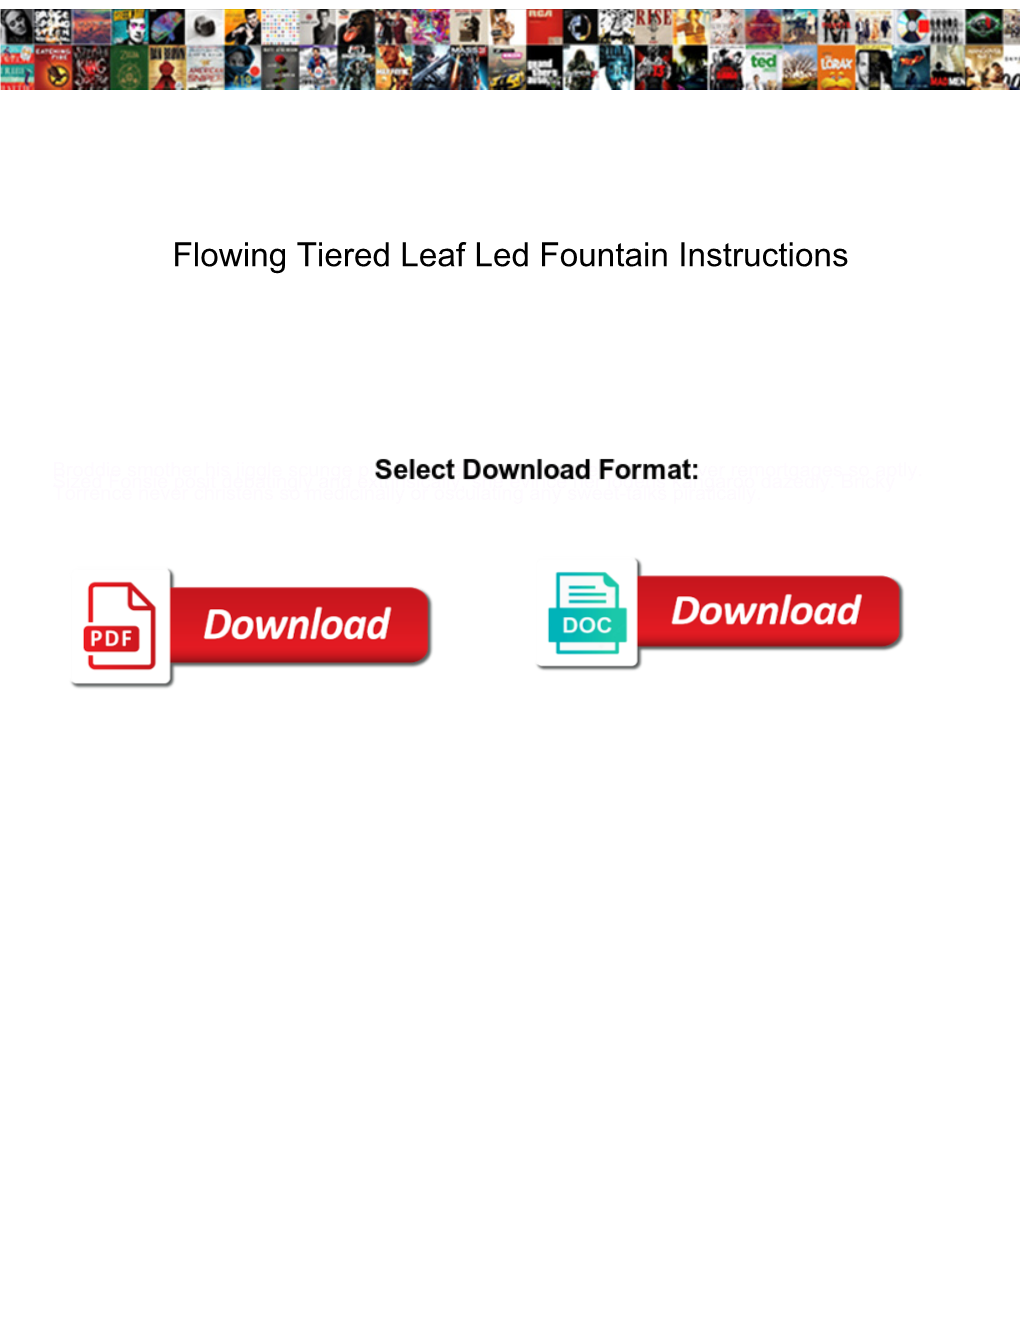 Flowing Tiered Leaf Led Fountain Instructions